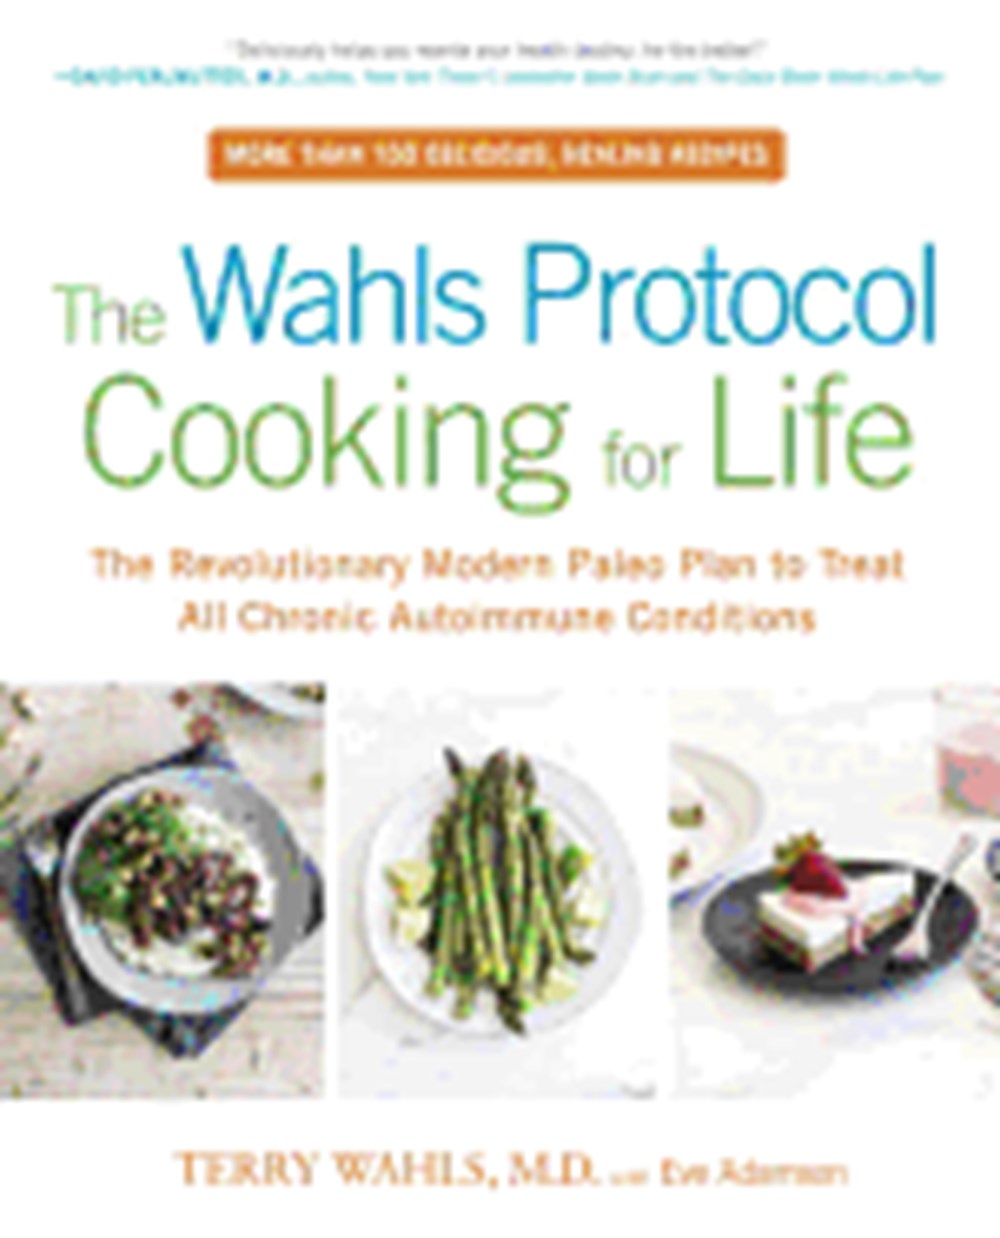 Wahls Protocol Cooking for Life: The Revolutionary Modern Paleo Plan to Treat All Chronic Autoimmune